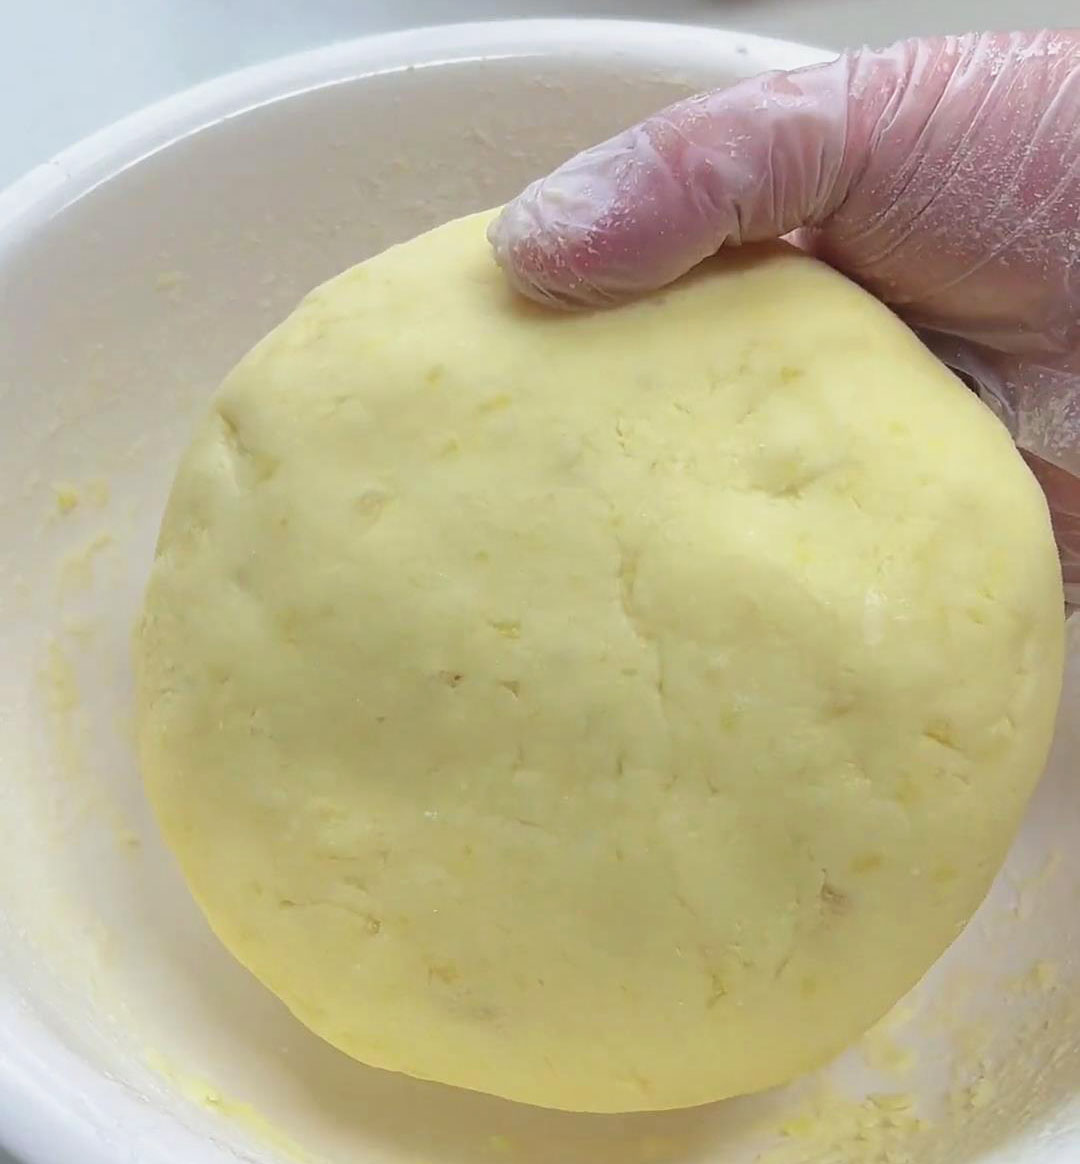 Knead the mixture into a soft ball